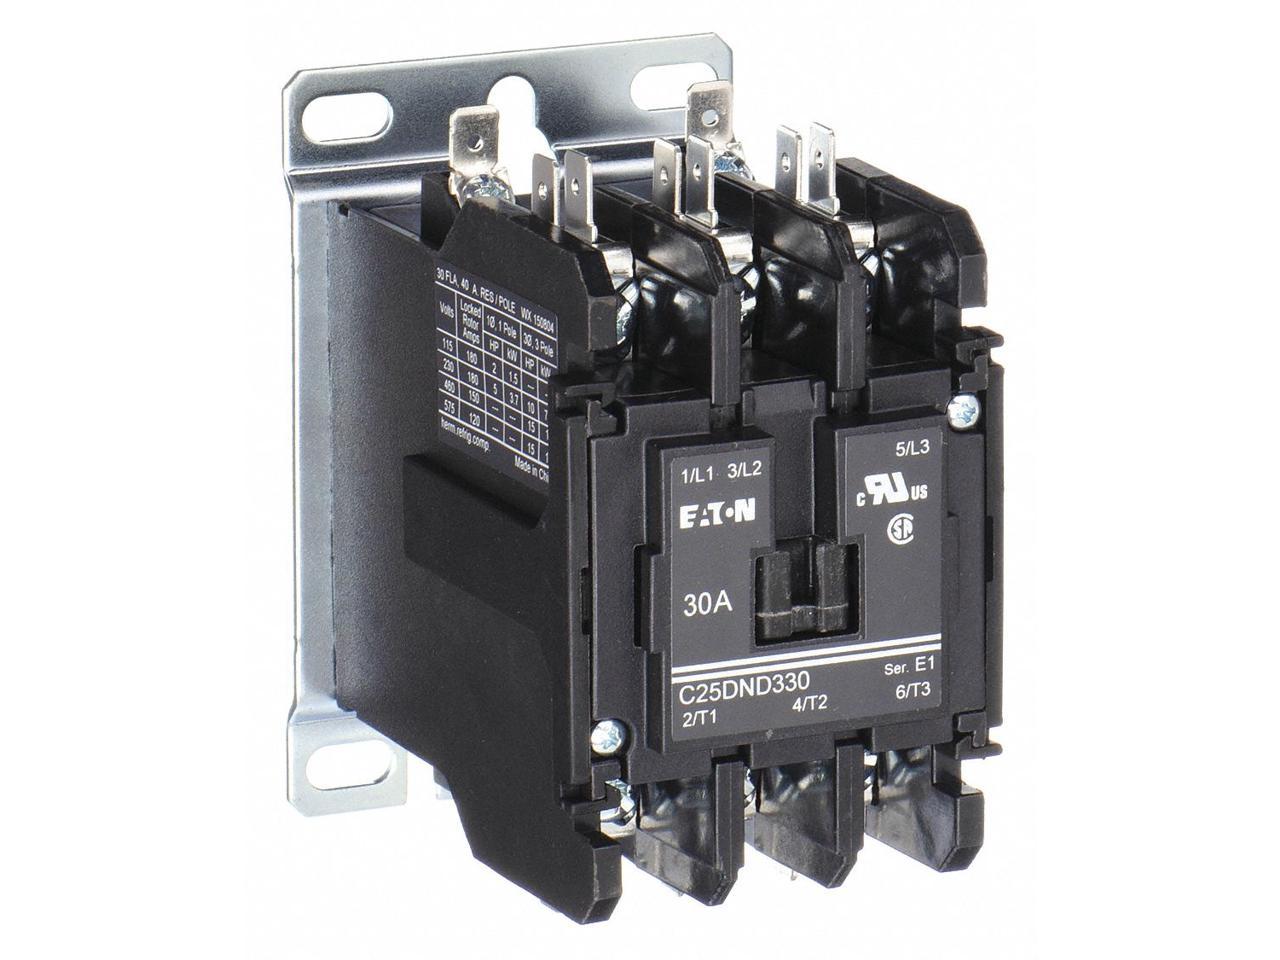 Eaton C25BNB240T Compact Definite Purpose Contactor 40a Inductive C1 for sale online 